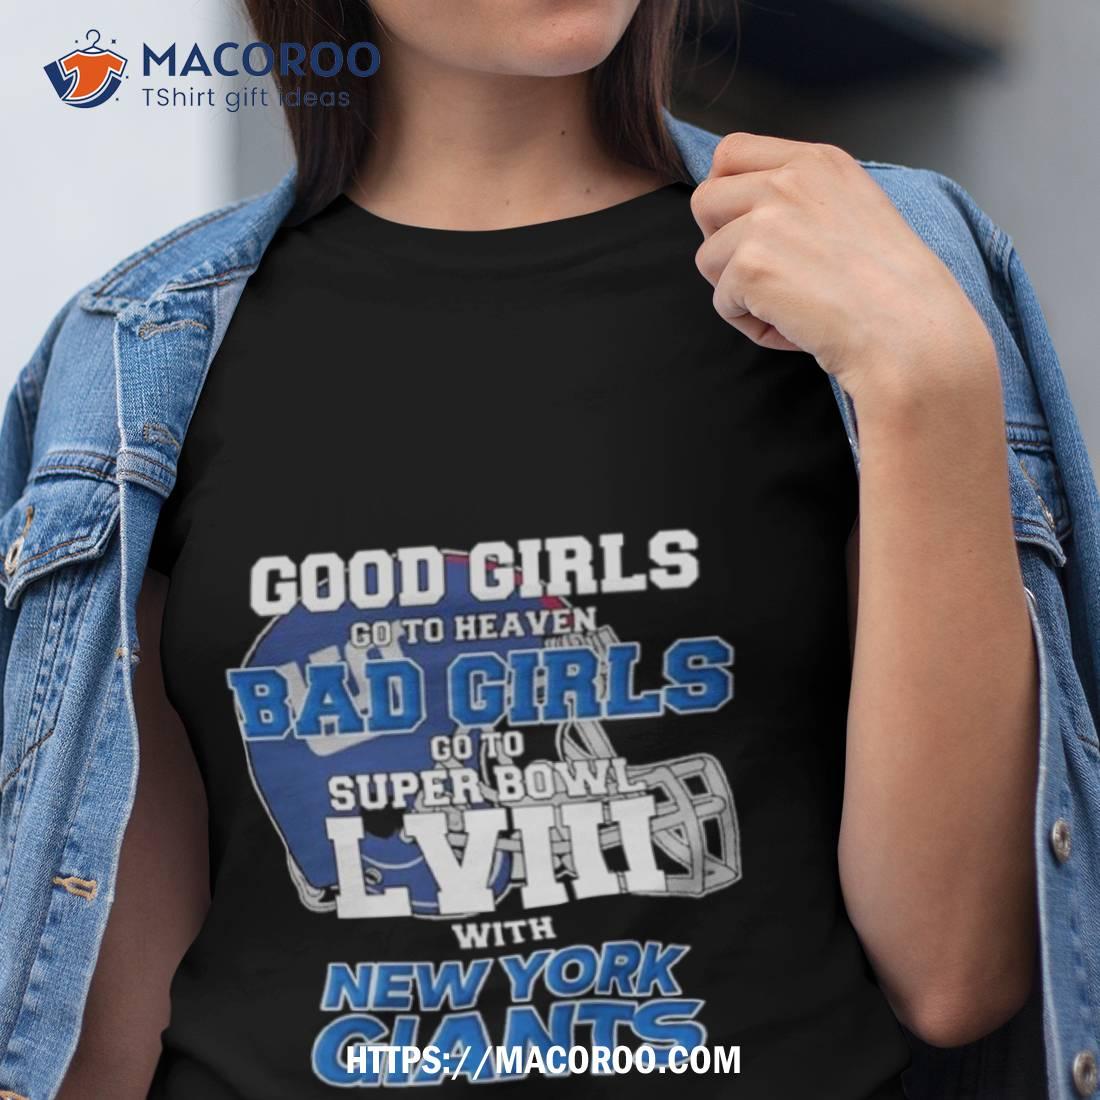 Good Girls Go To Heaven Bad Girls Go To Super Bowl Lviii With New York  Giants